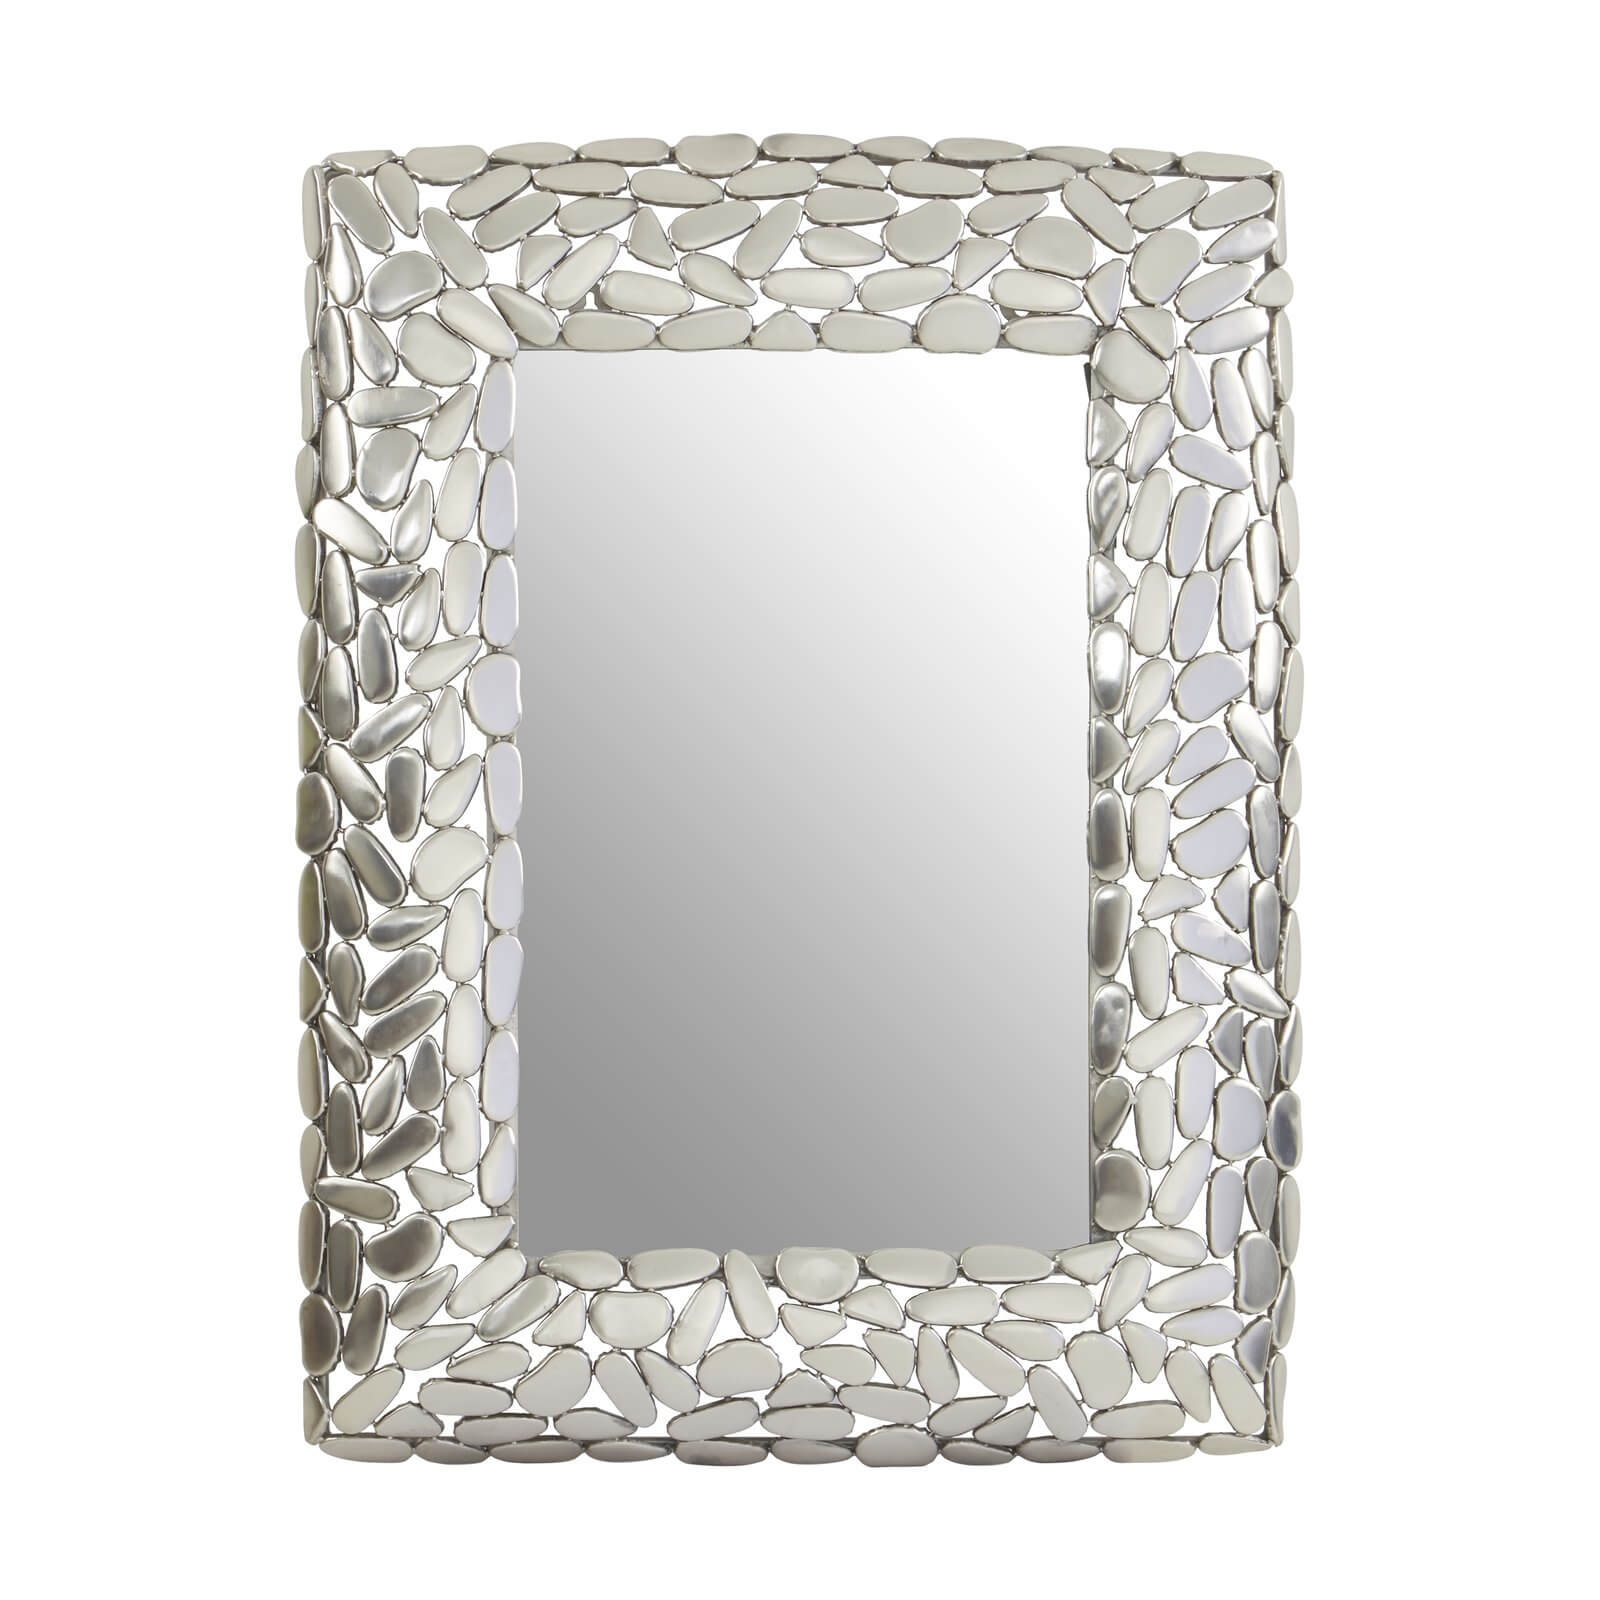 Temple Pebble Effect Rect Wall Mirror